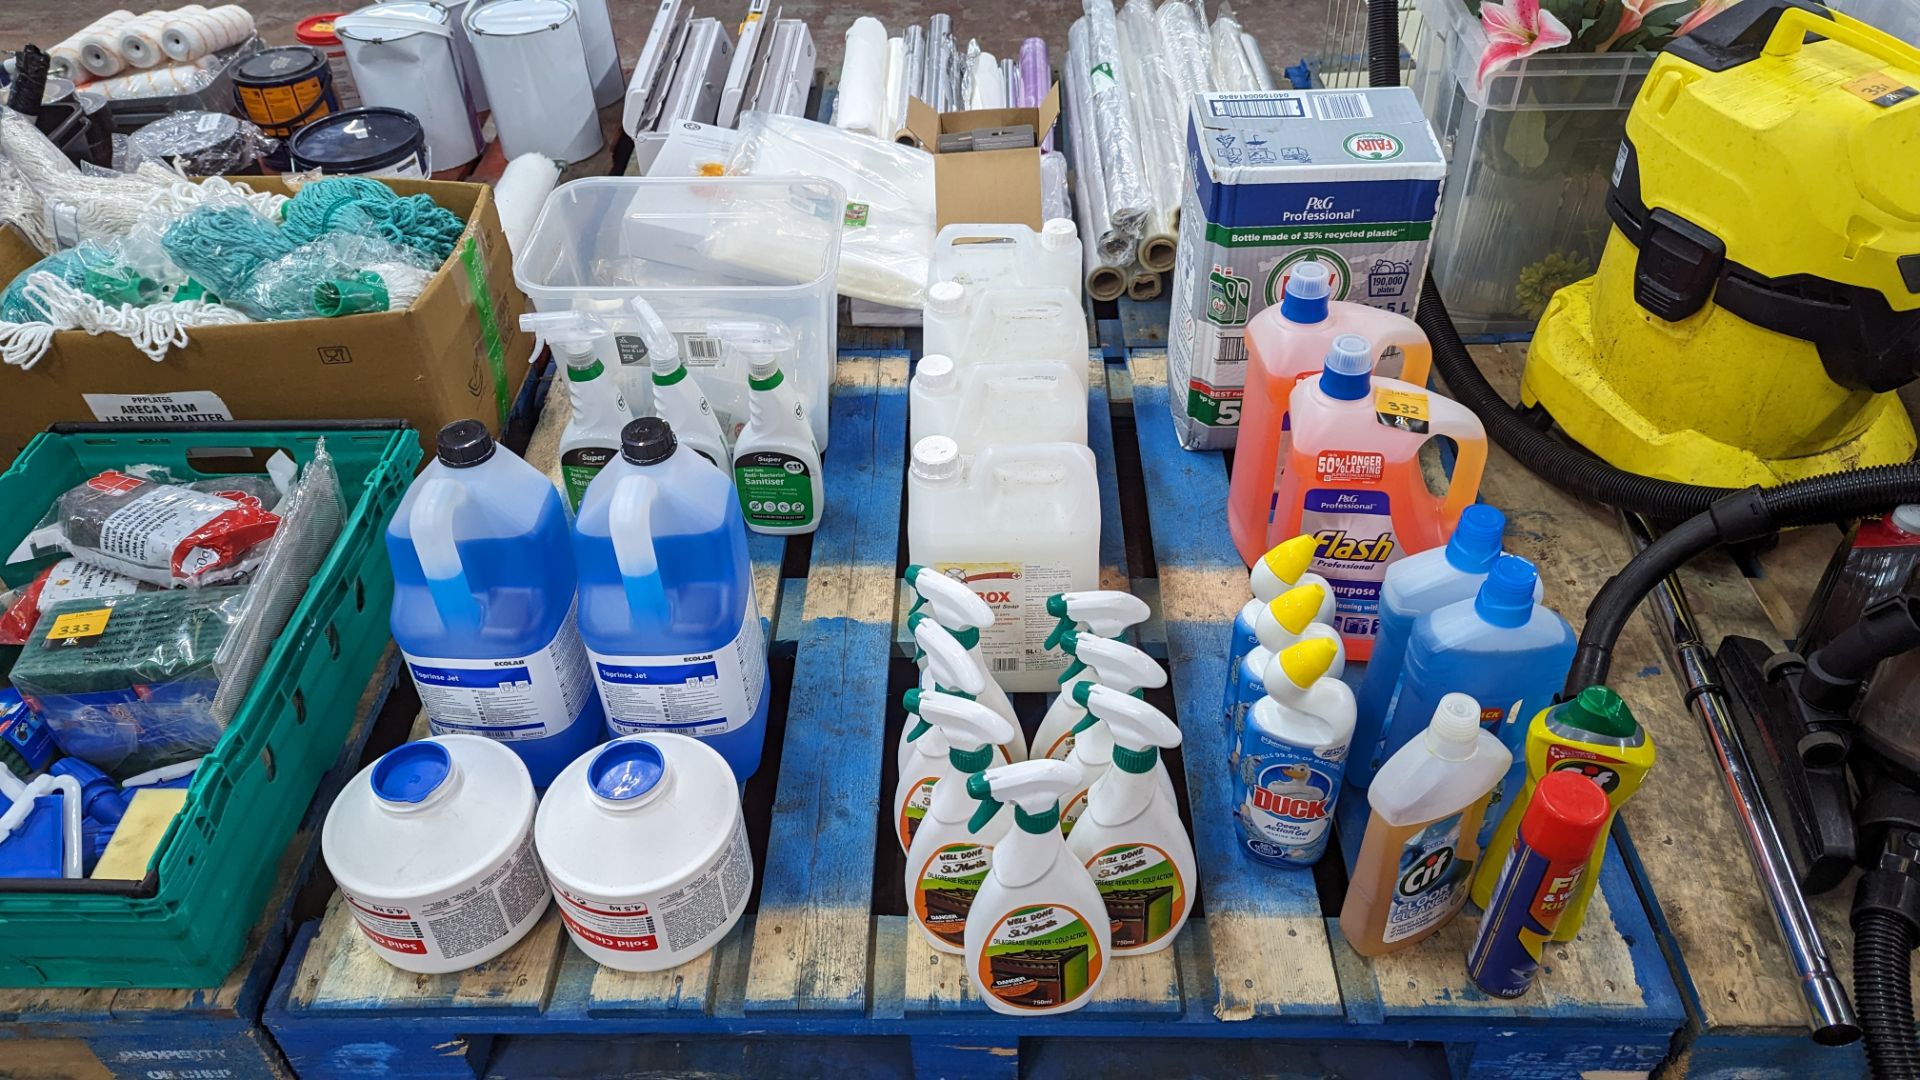 The contents of a pallet of cleaning fluids/solutions - Image 2 of 12